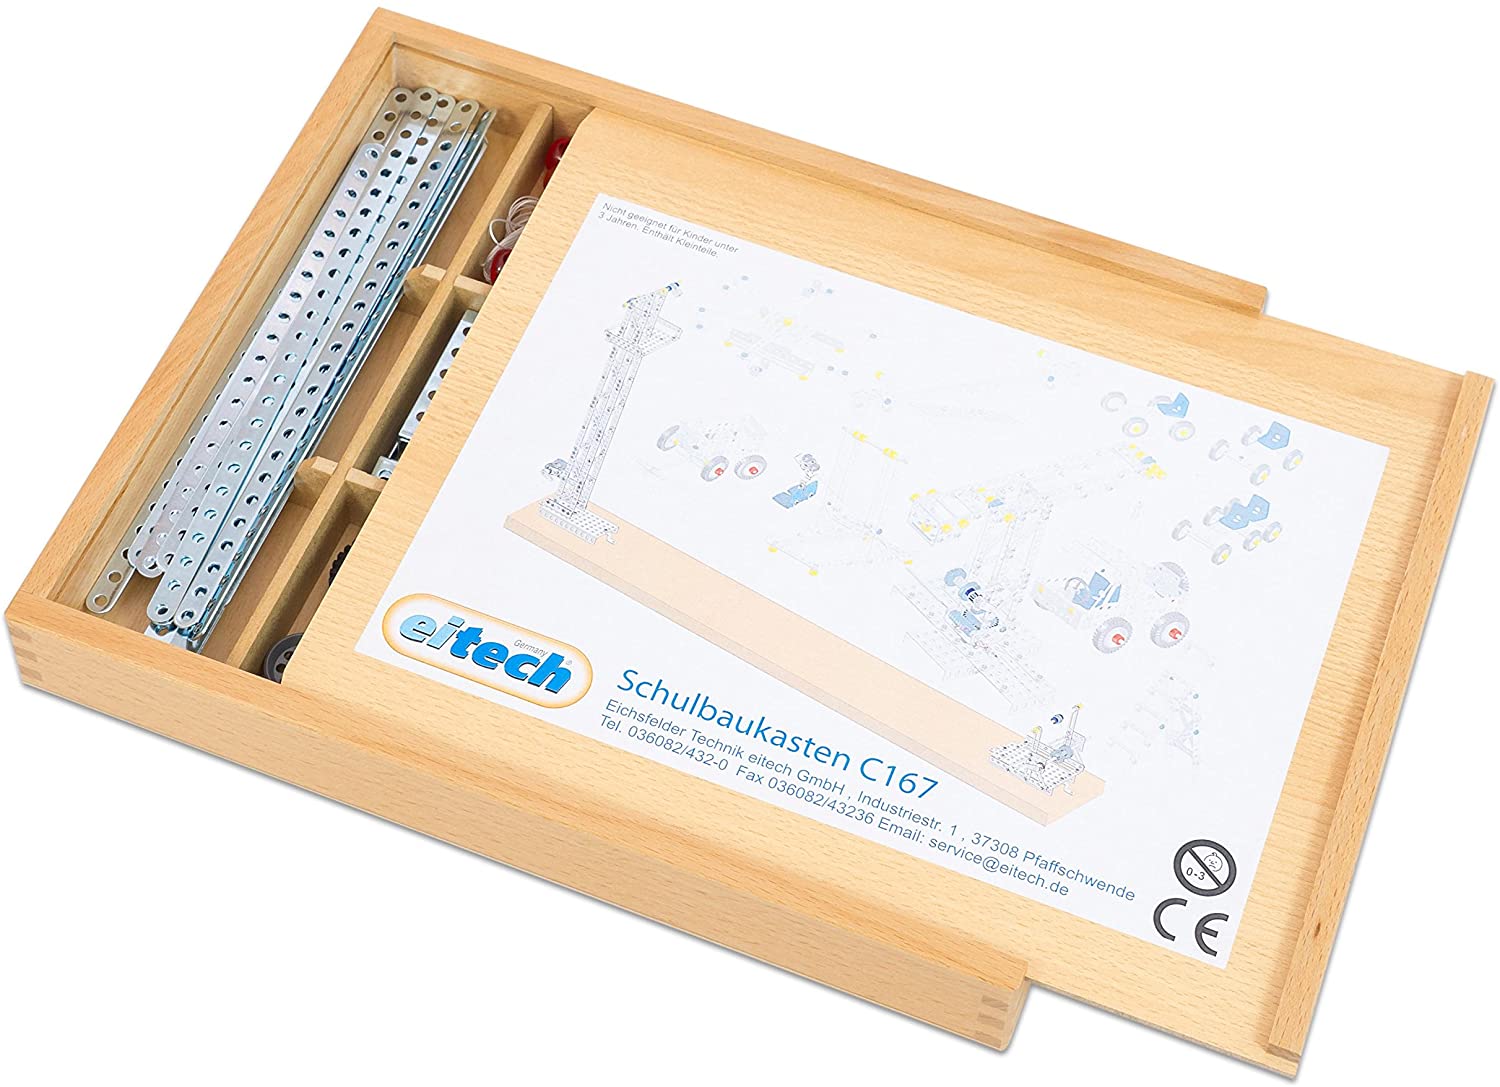 Eitech Metal Construction Set, Over 527 Pieces In A Wooden Box With Sliding